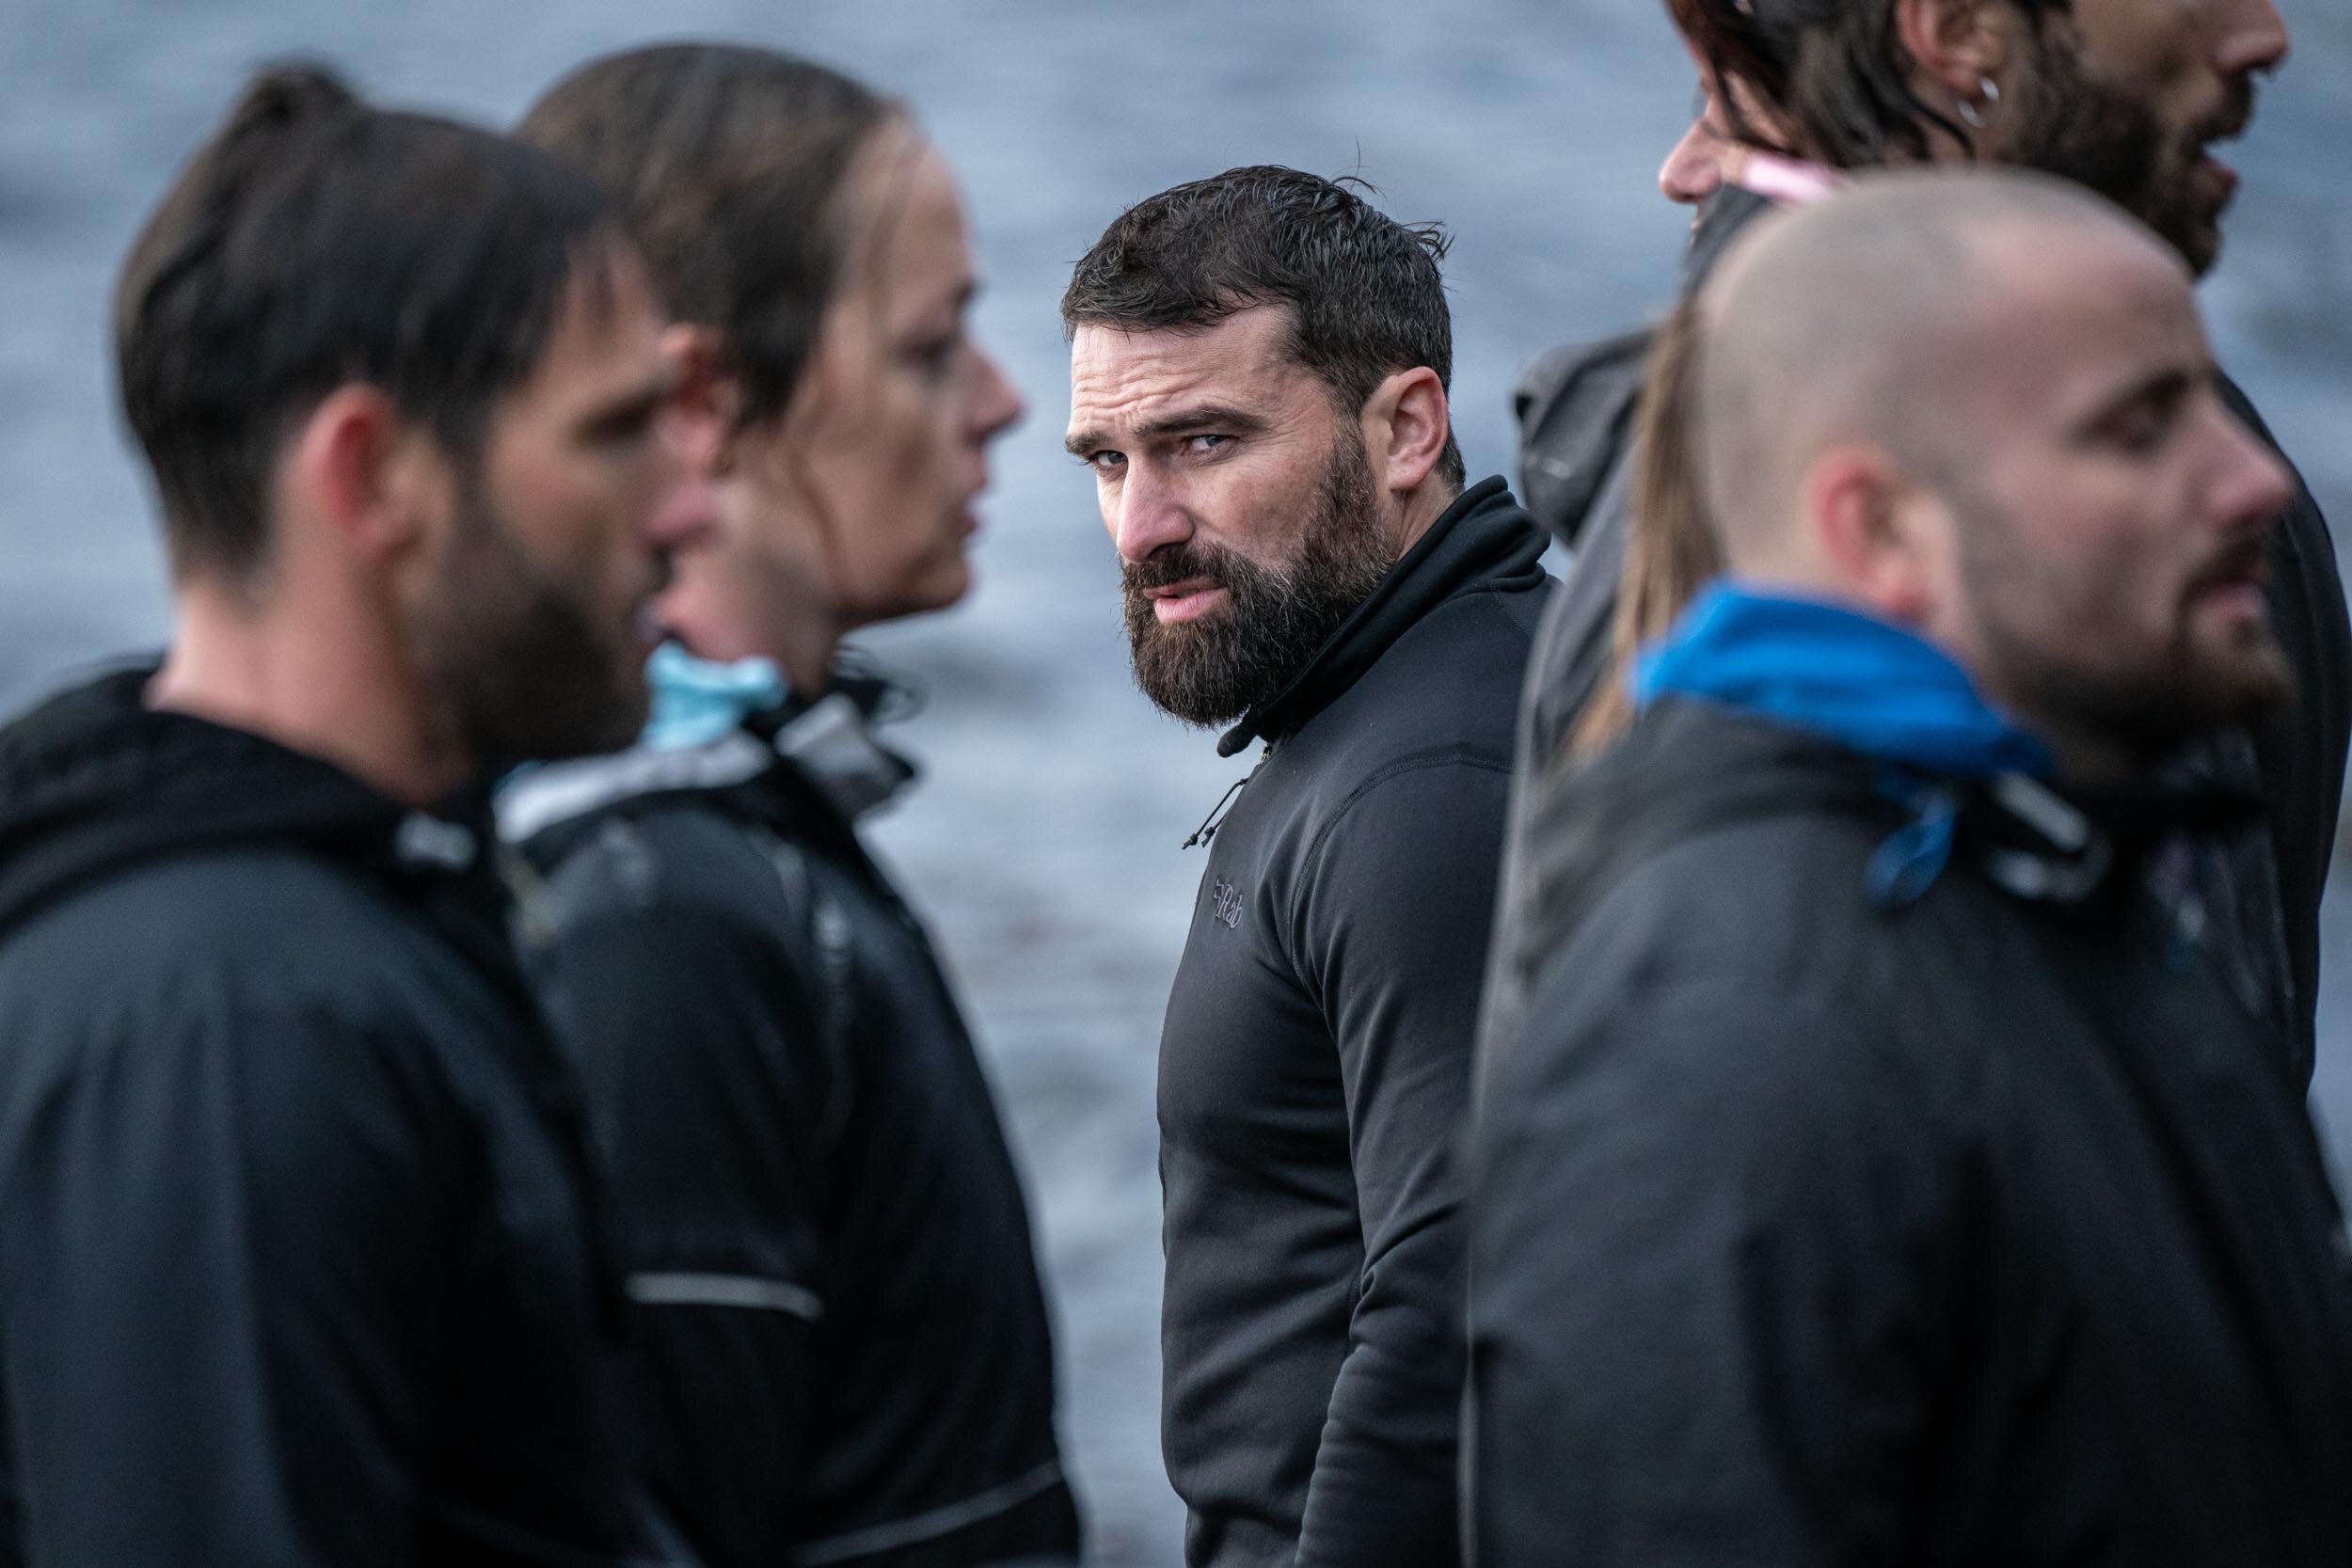  Chief Instructor Ant Middleton inspects the recruits  Minnow Films / Channel 4 